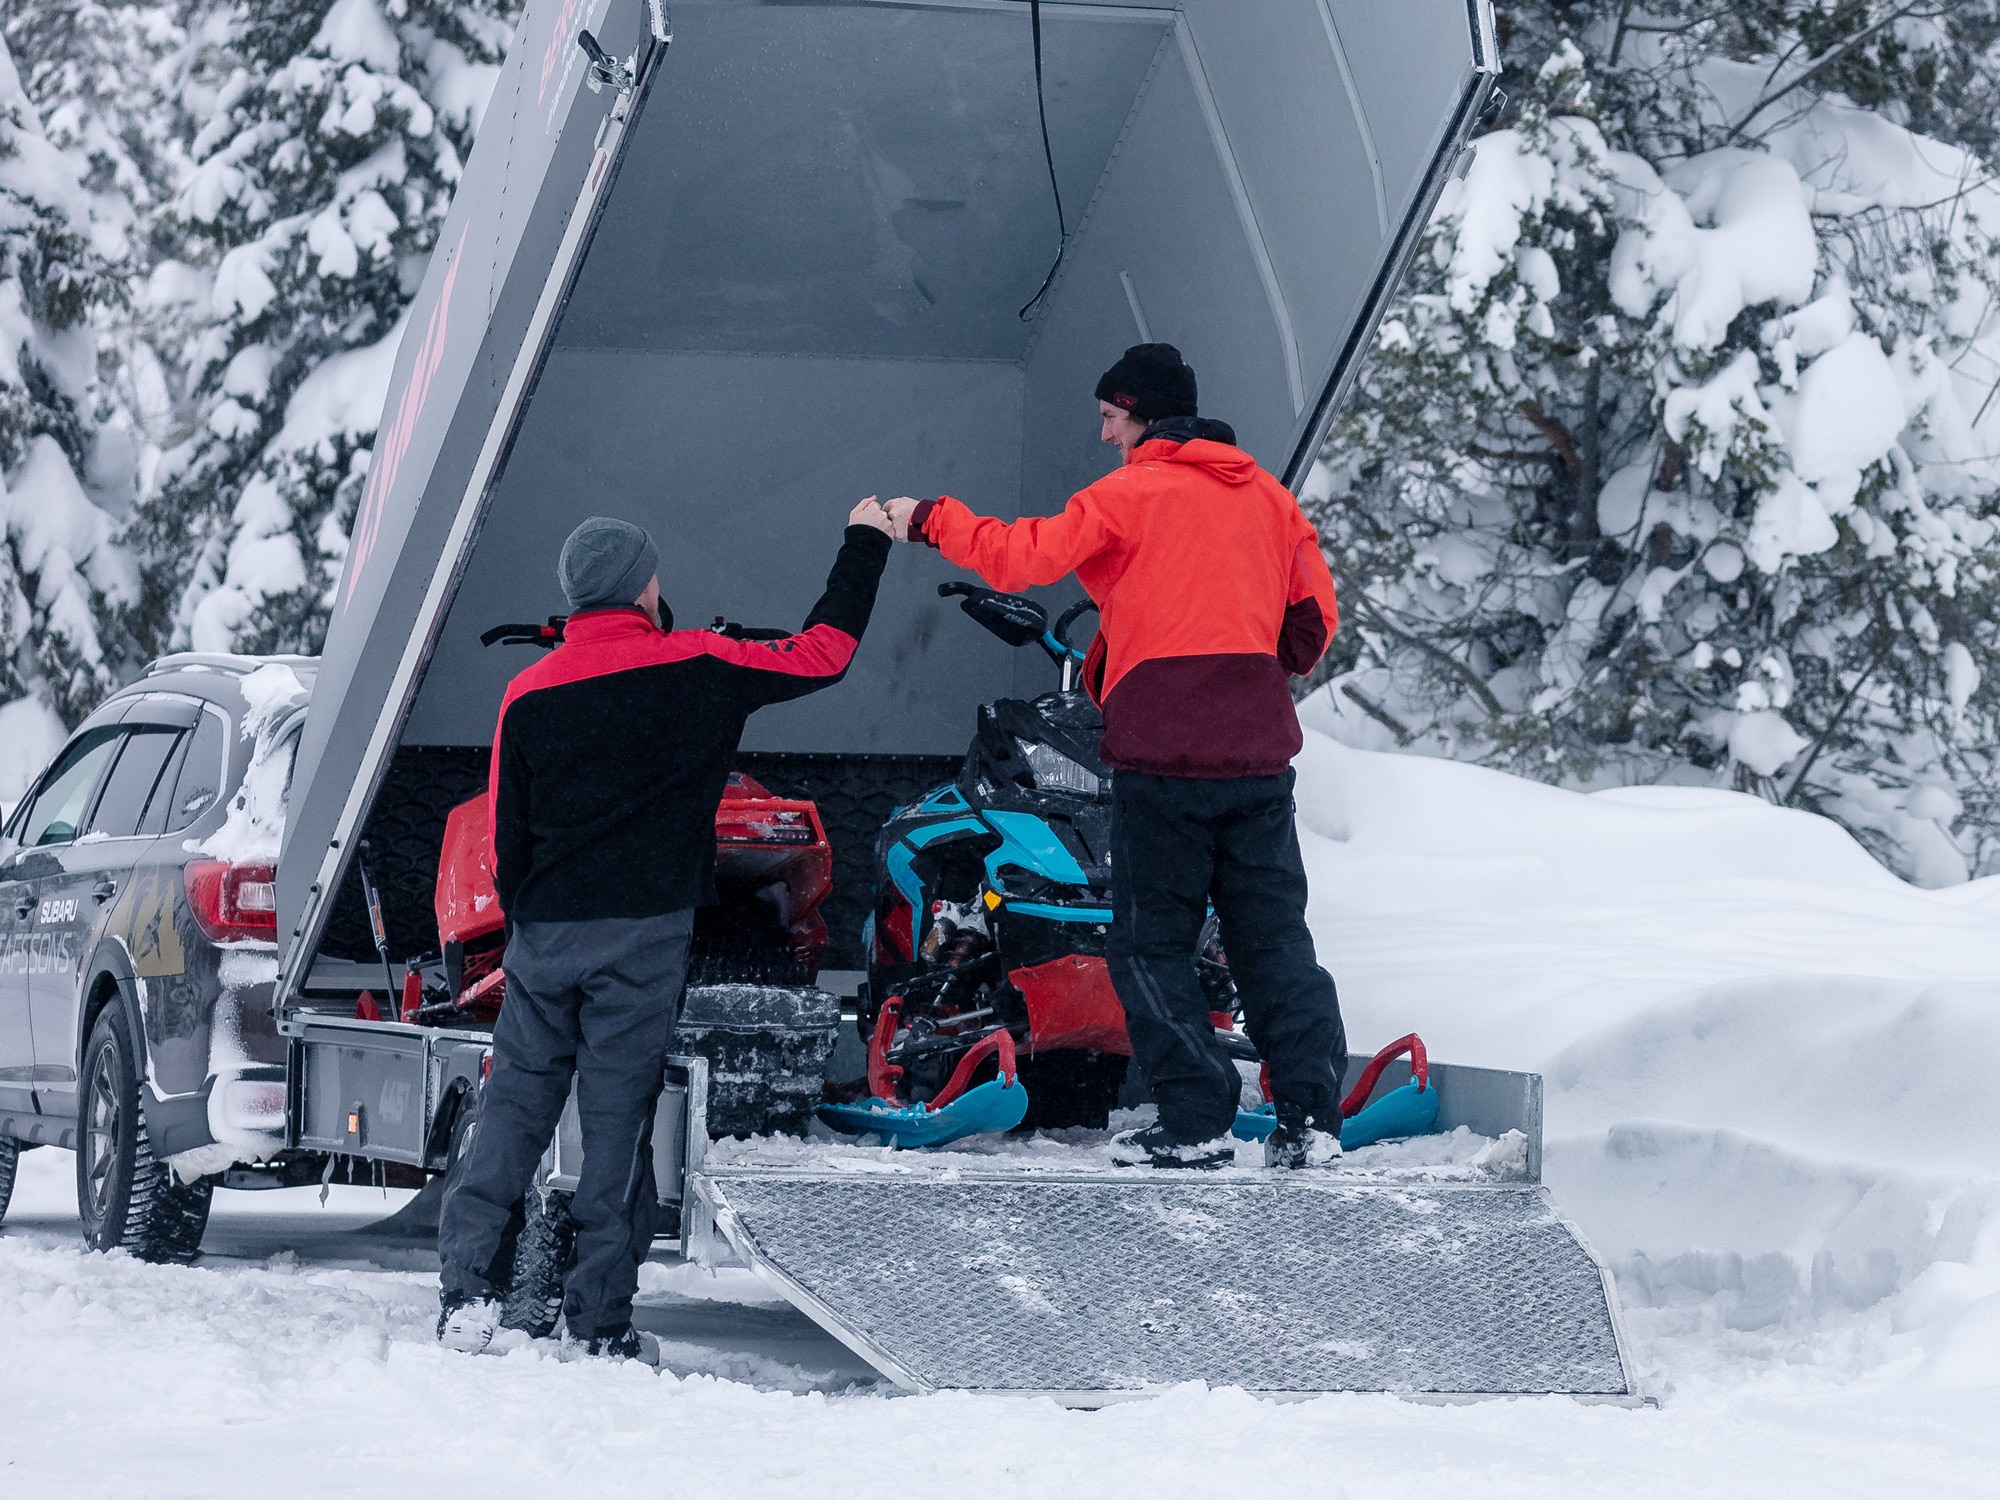 Two Lynx Riders and Snowmobiles in a trailer